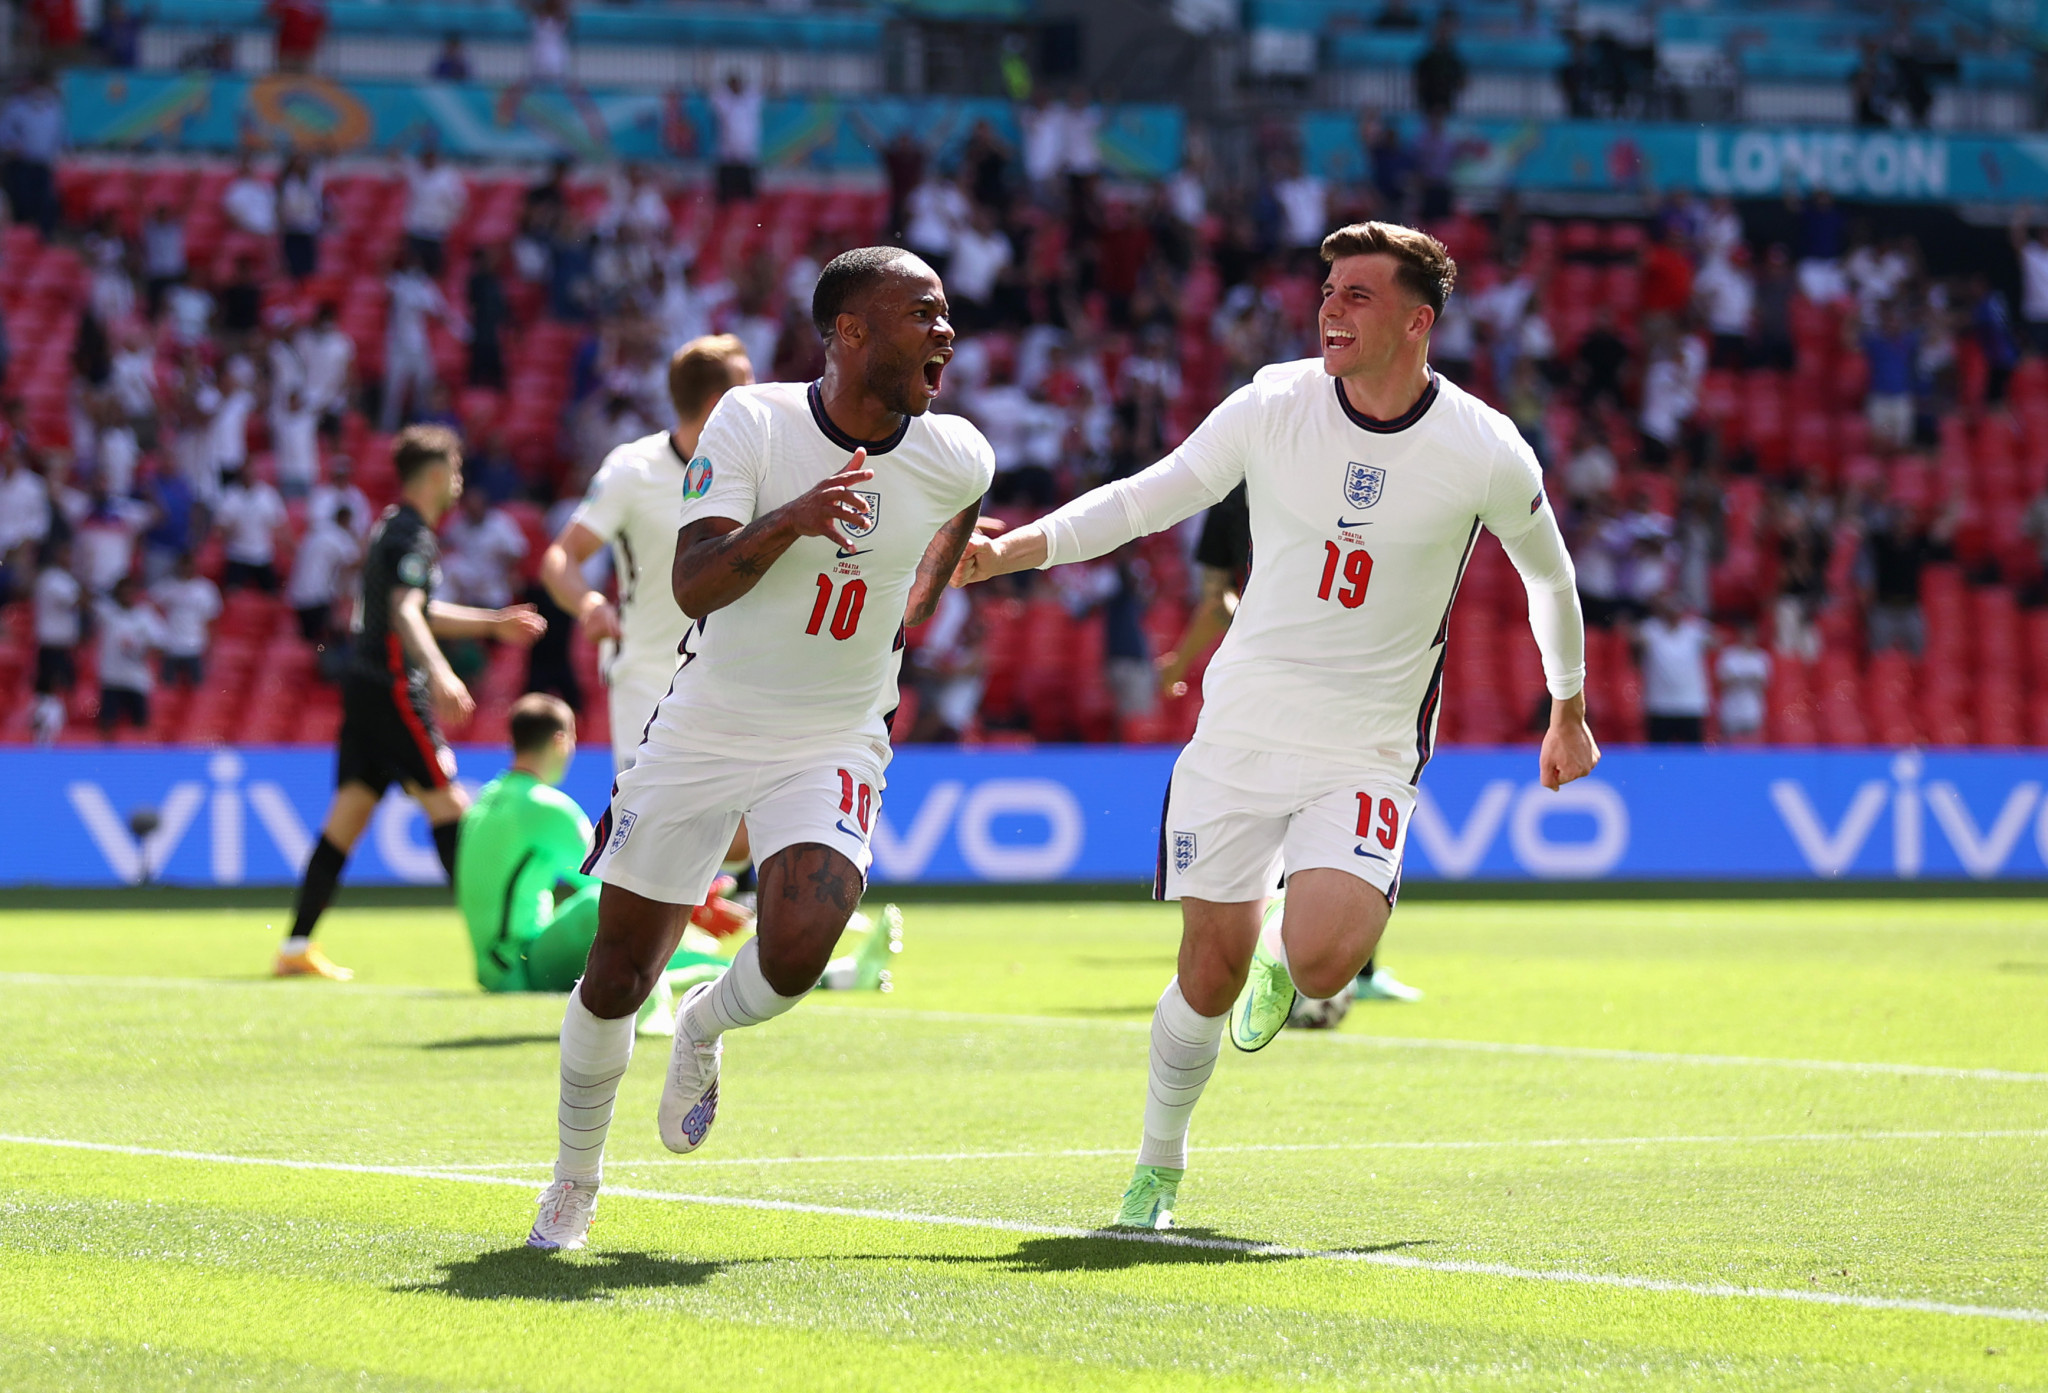 Local lad Sterling gives England victory over Croatia in opening Euro 2020 match at Wembley